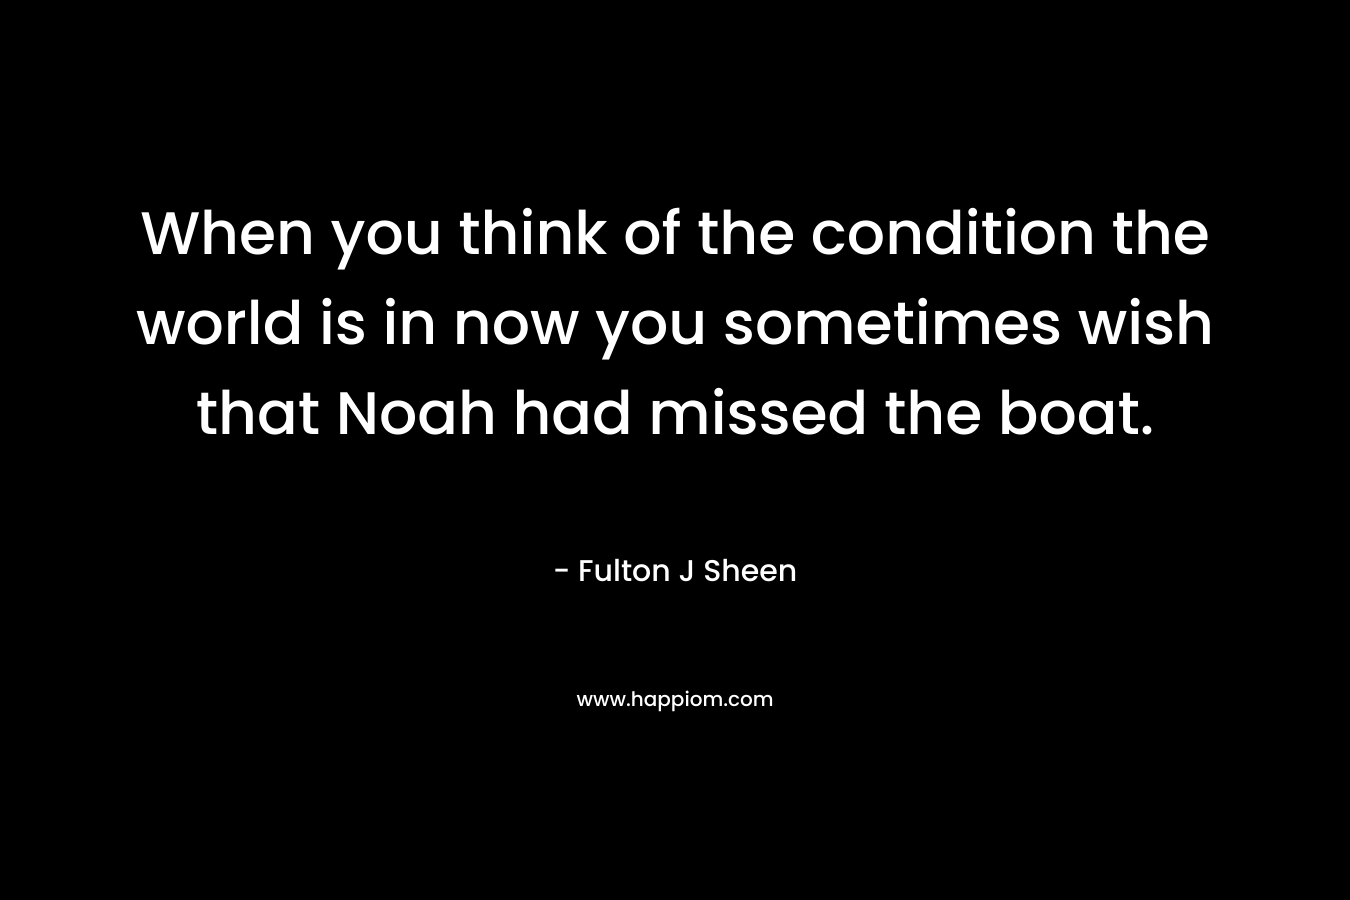 When you think of the condition the world is in now you sometimes wish that Noah had missed the boat.